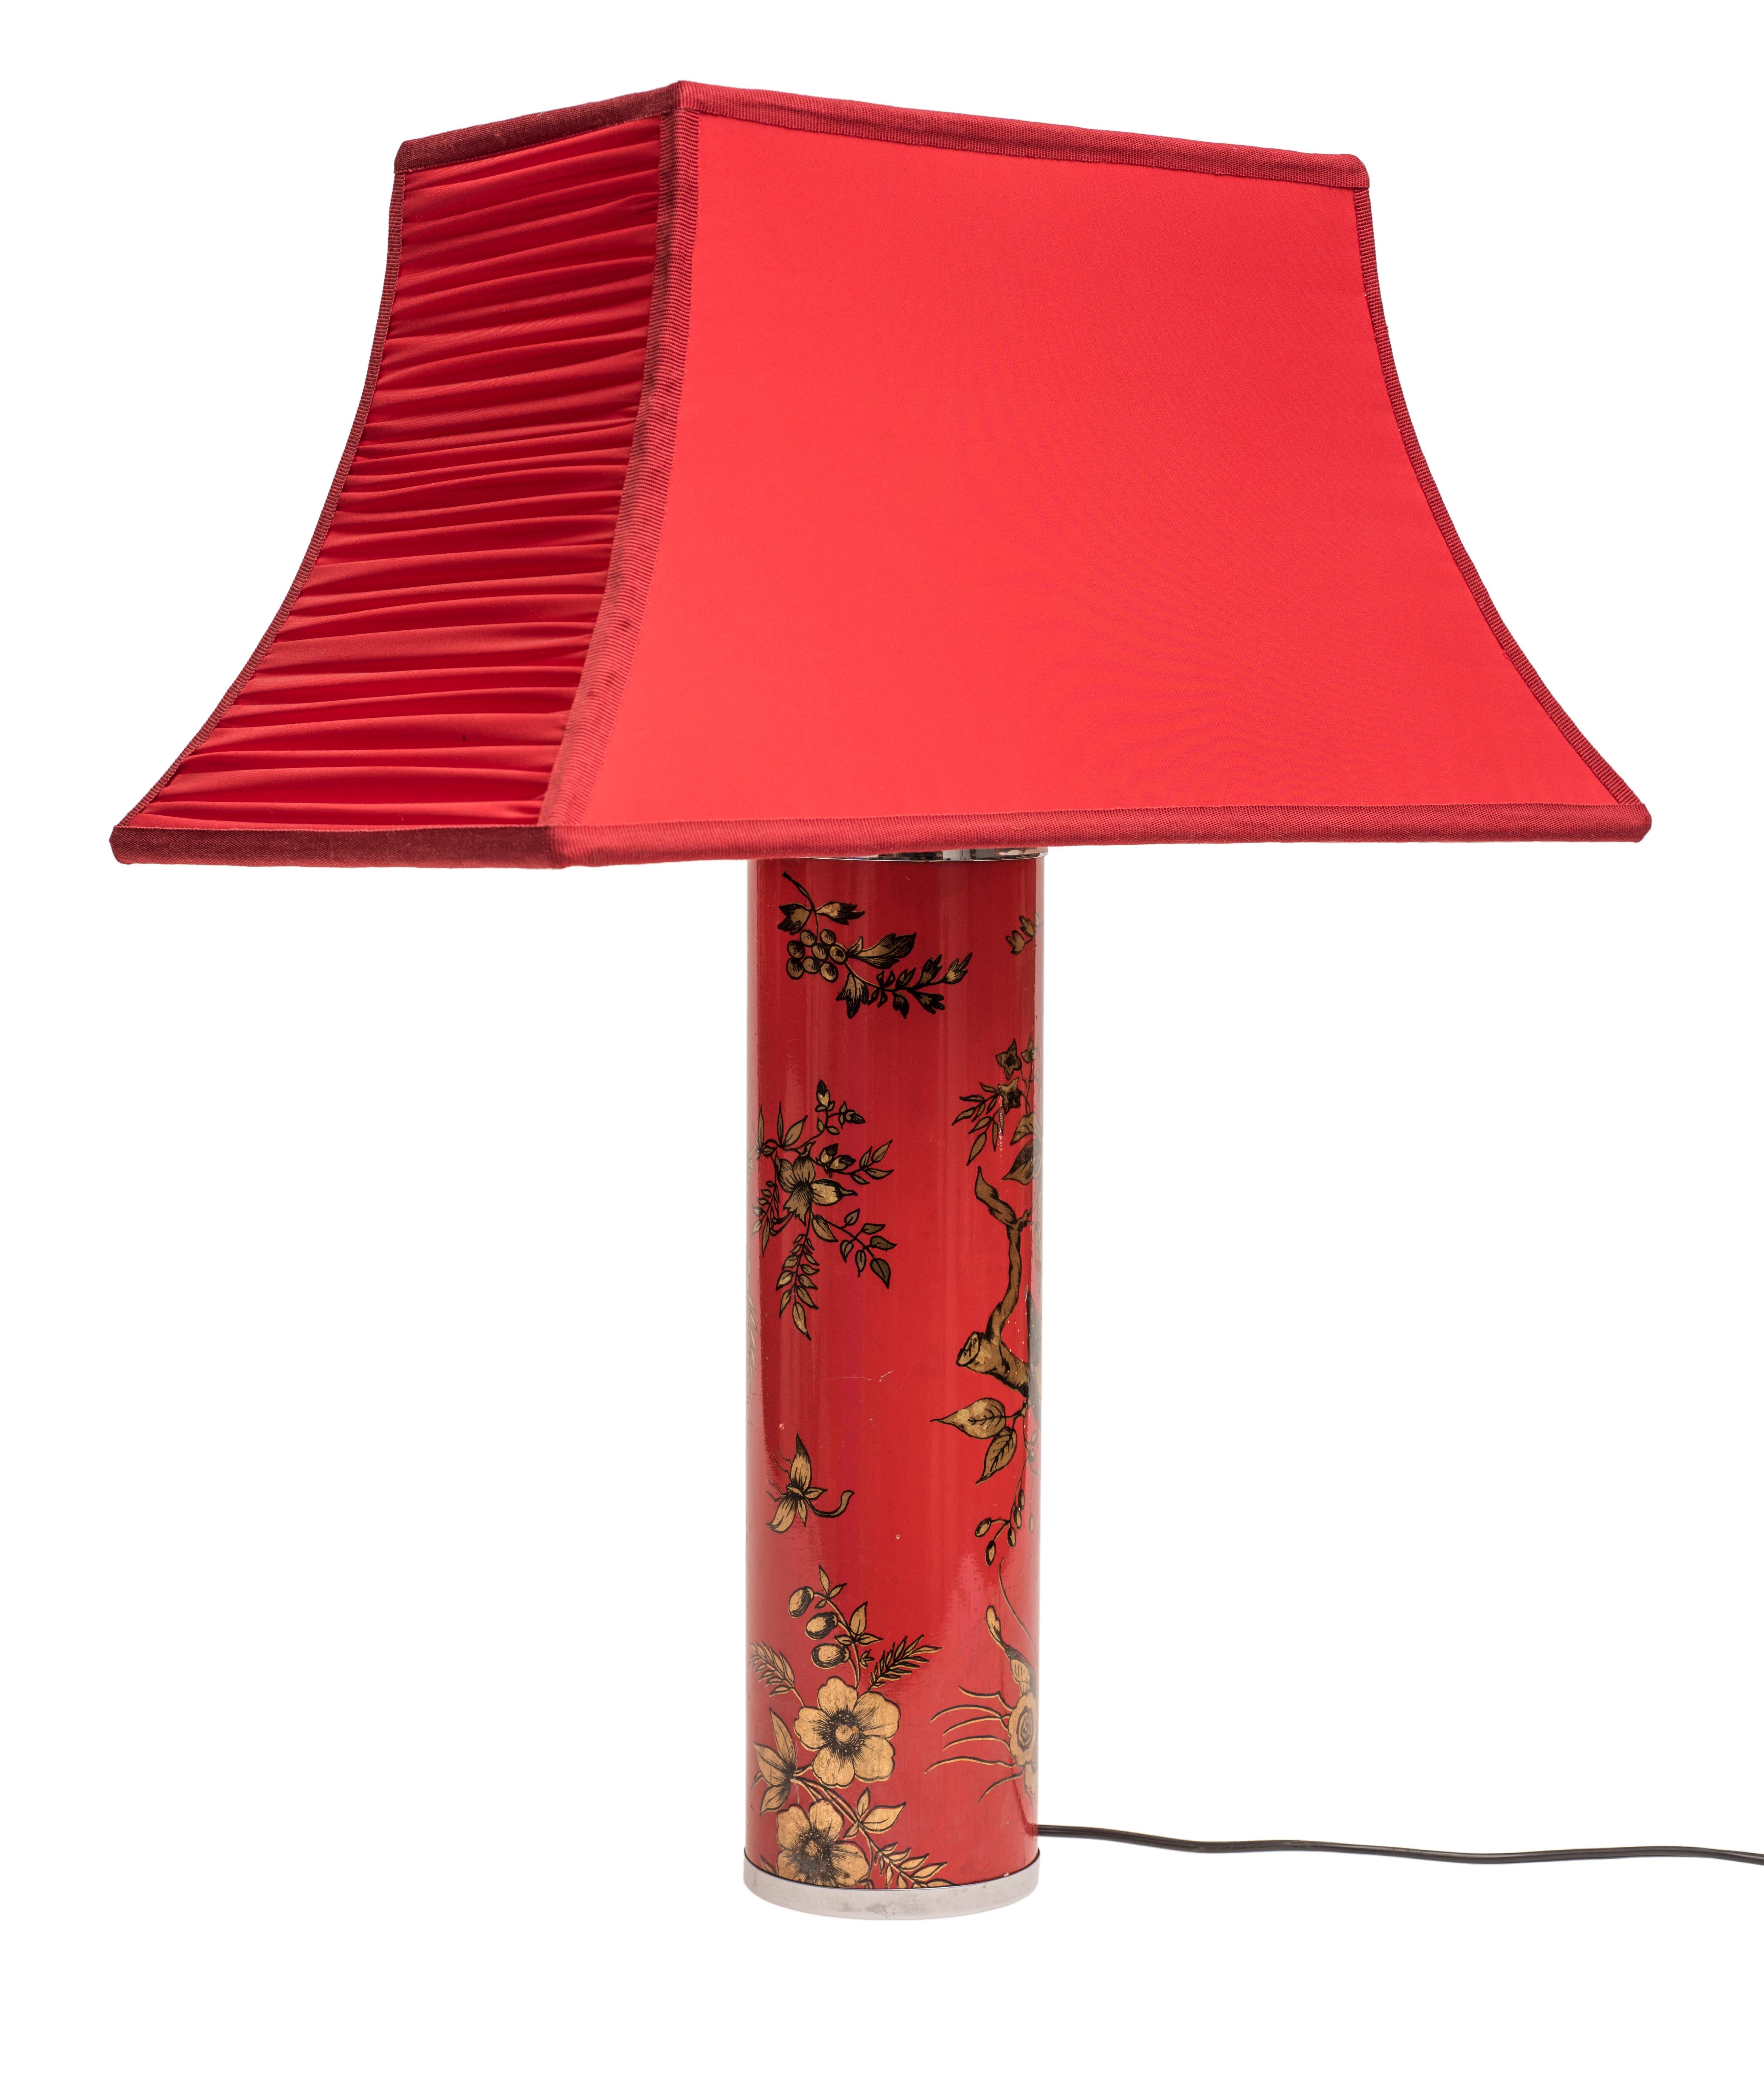 Red lamp is an original design lamp designed by Piero Fornasetti in the 1960s.

Original metal lamp with a red lacquered finish and a floral decoration realized with the Chinese technique 